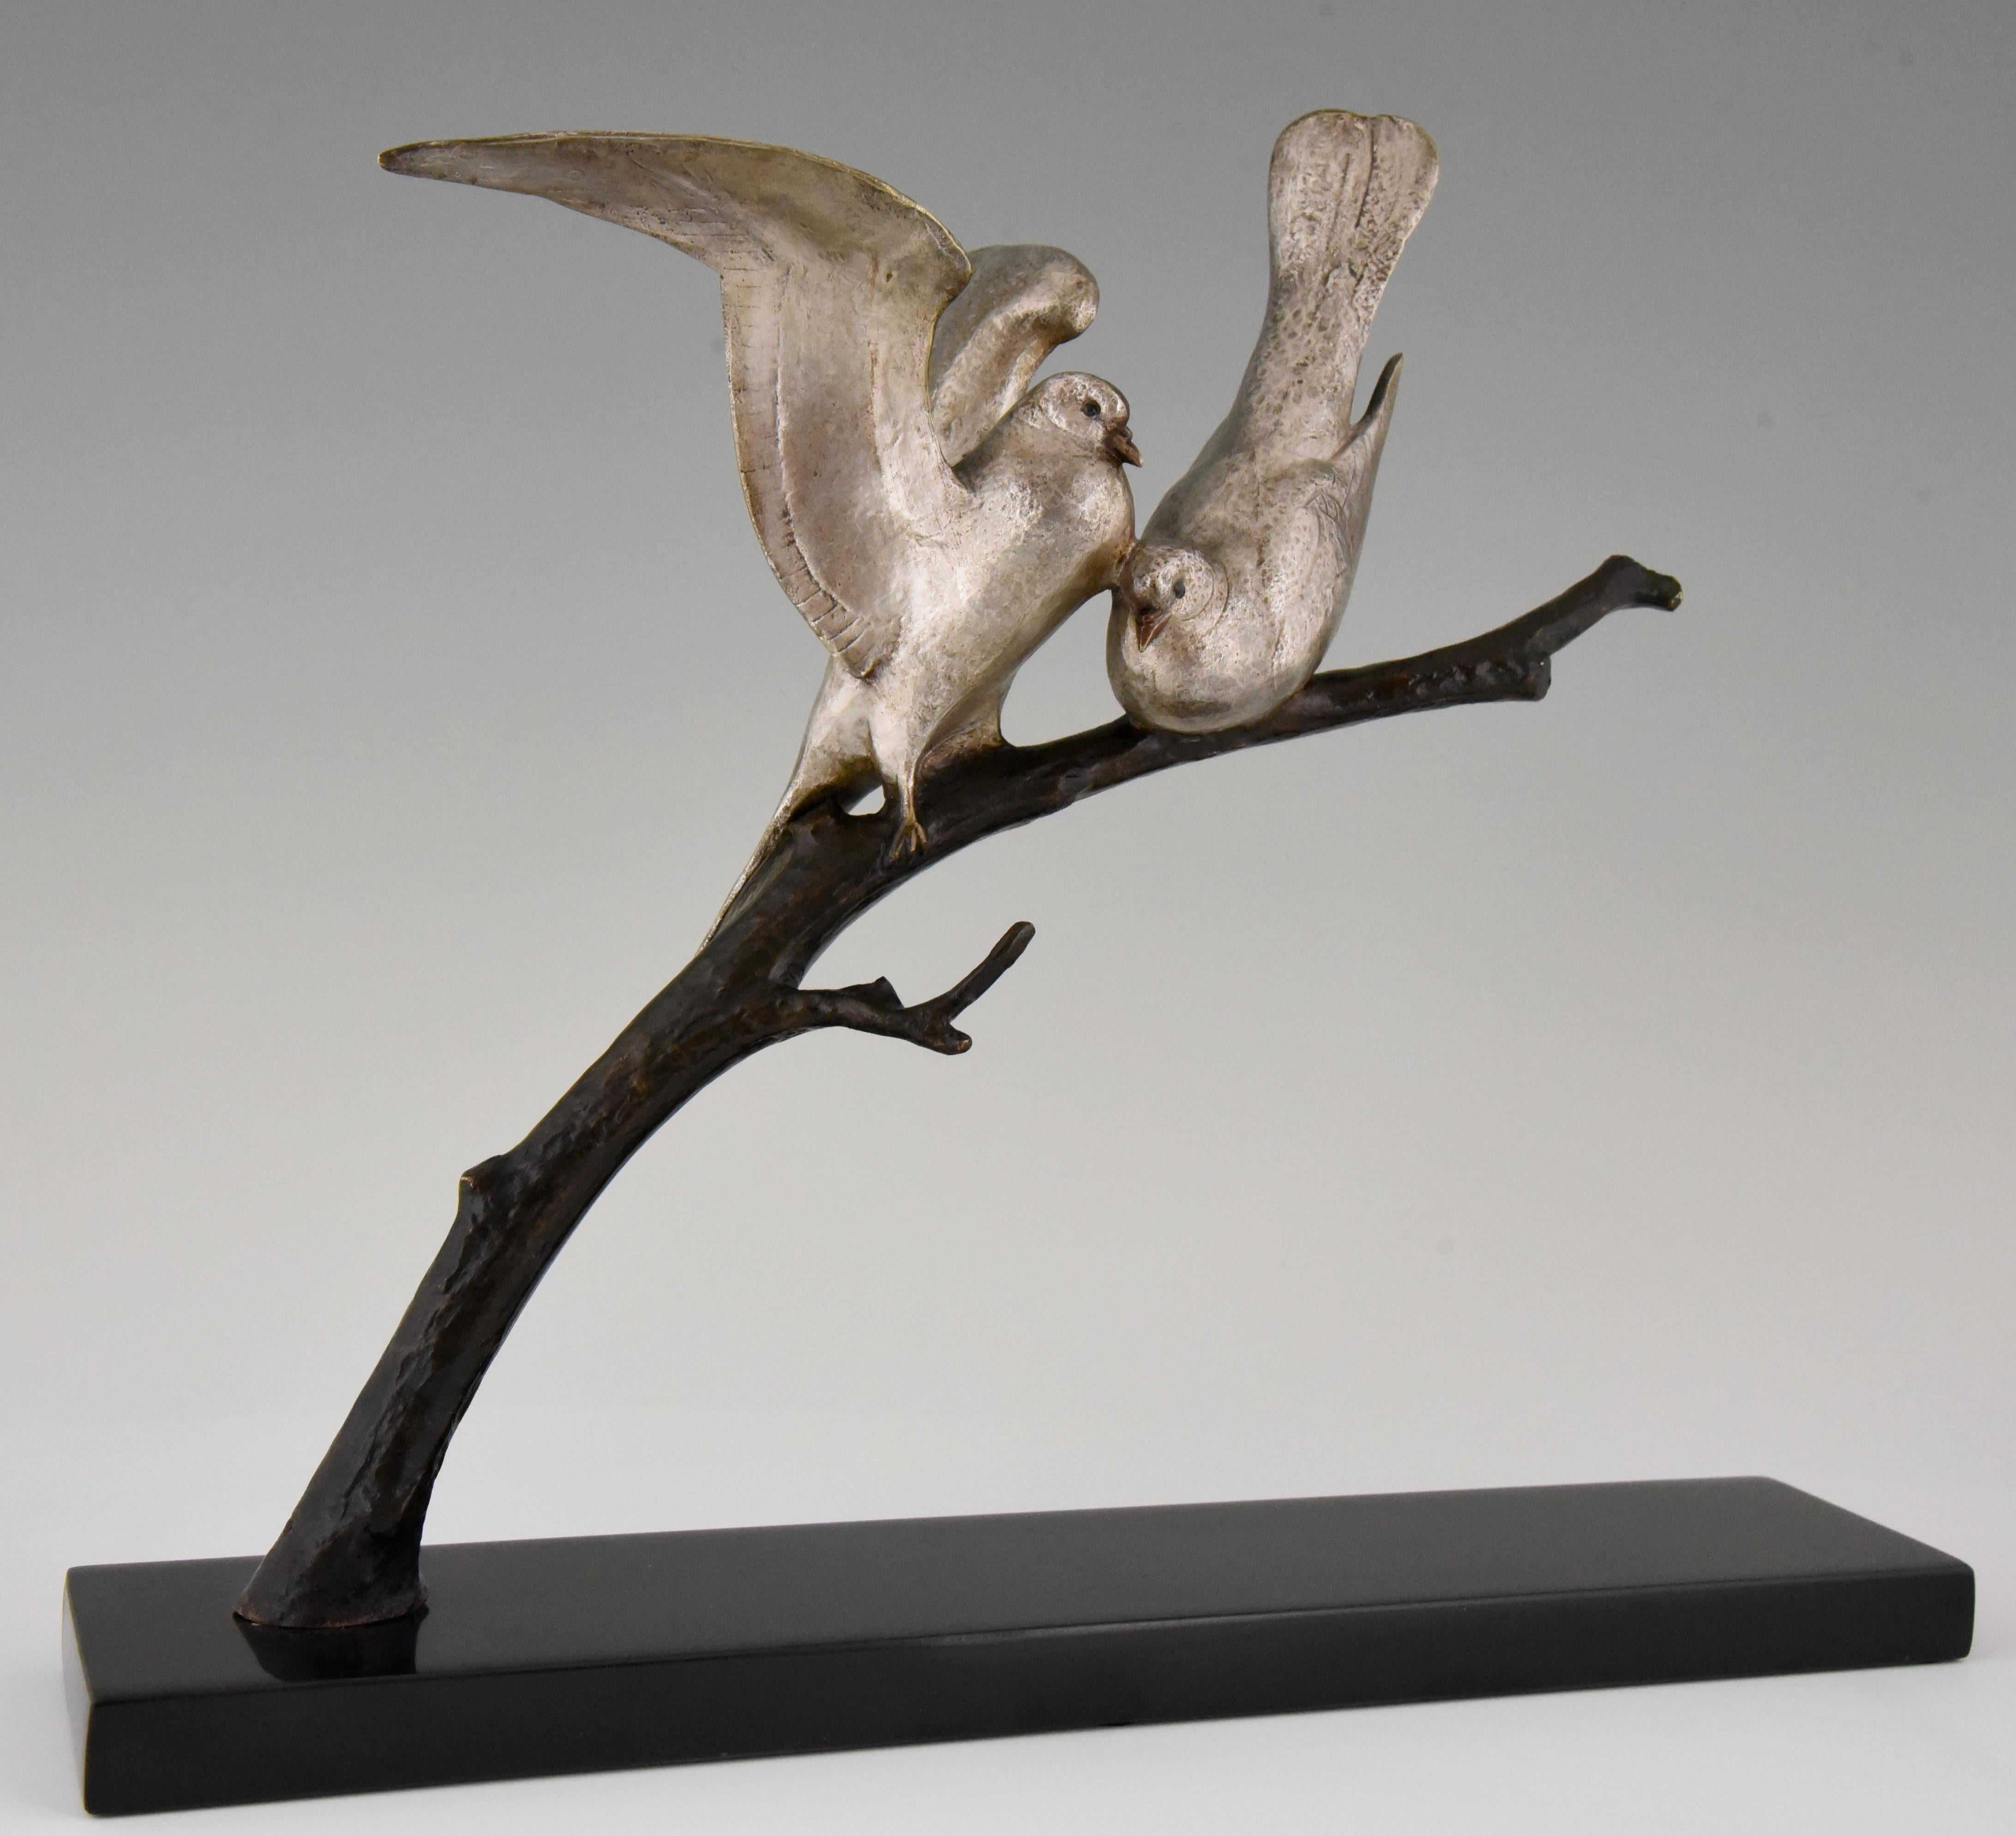 Lovely bronze Art Deco sculpture of two lovebirds sitting on a branch by the French sculptor Andre Vincent Becquerel. The bronze has a silver and brown patina and is mounted on a Belgian Black marble base. France circa 1930. 

This model is